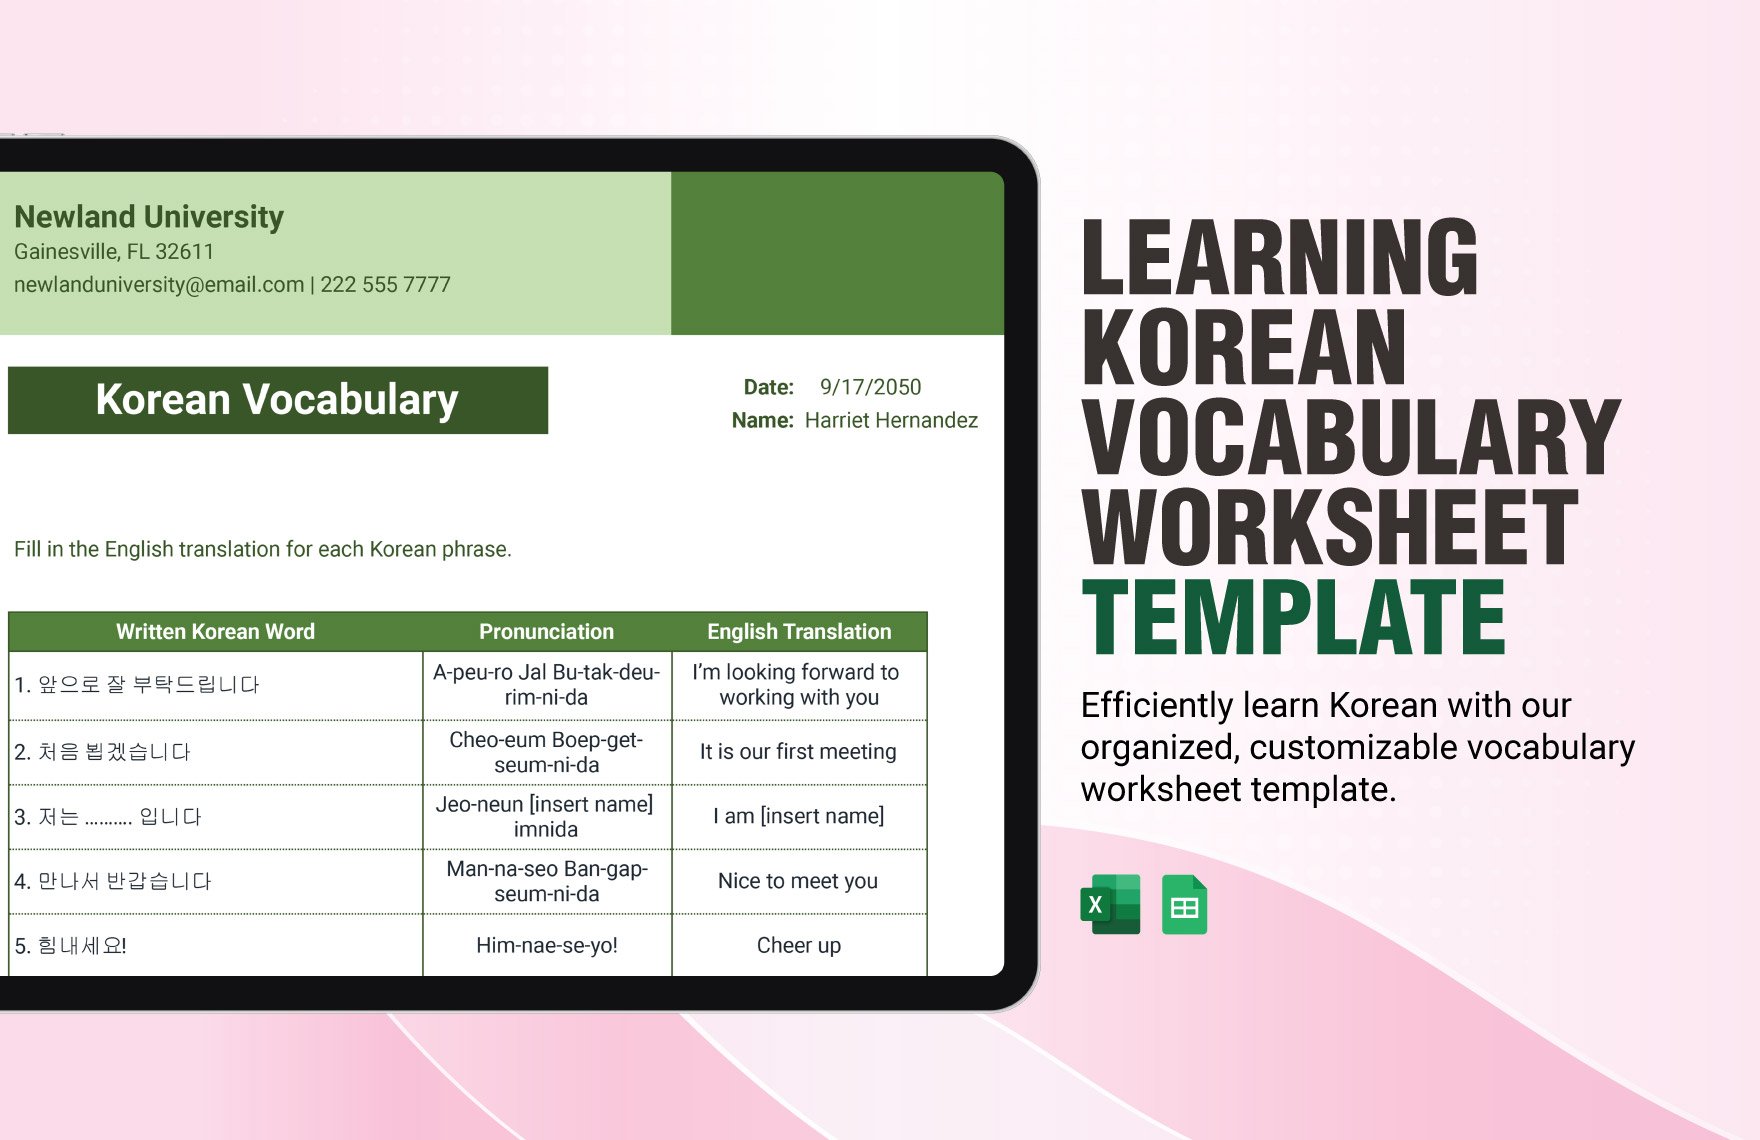 Learning Korean Vocabulary Worksheet Template in Excel, Google Sheets